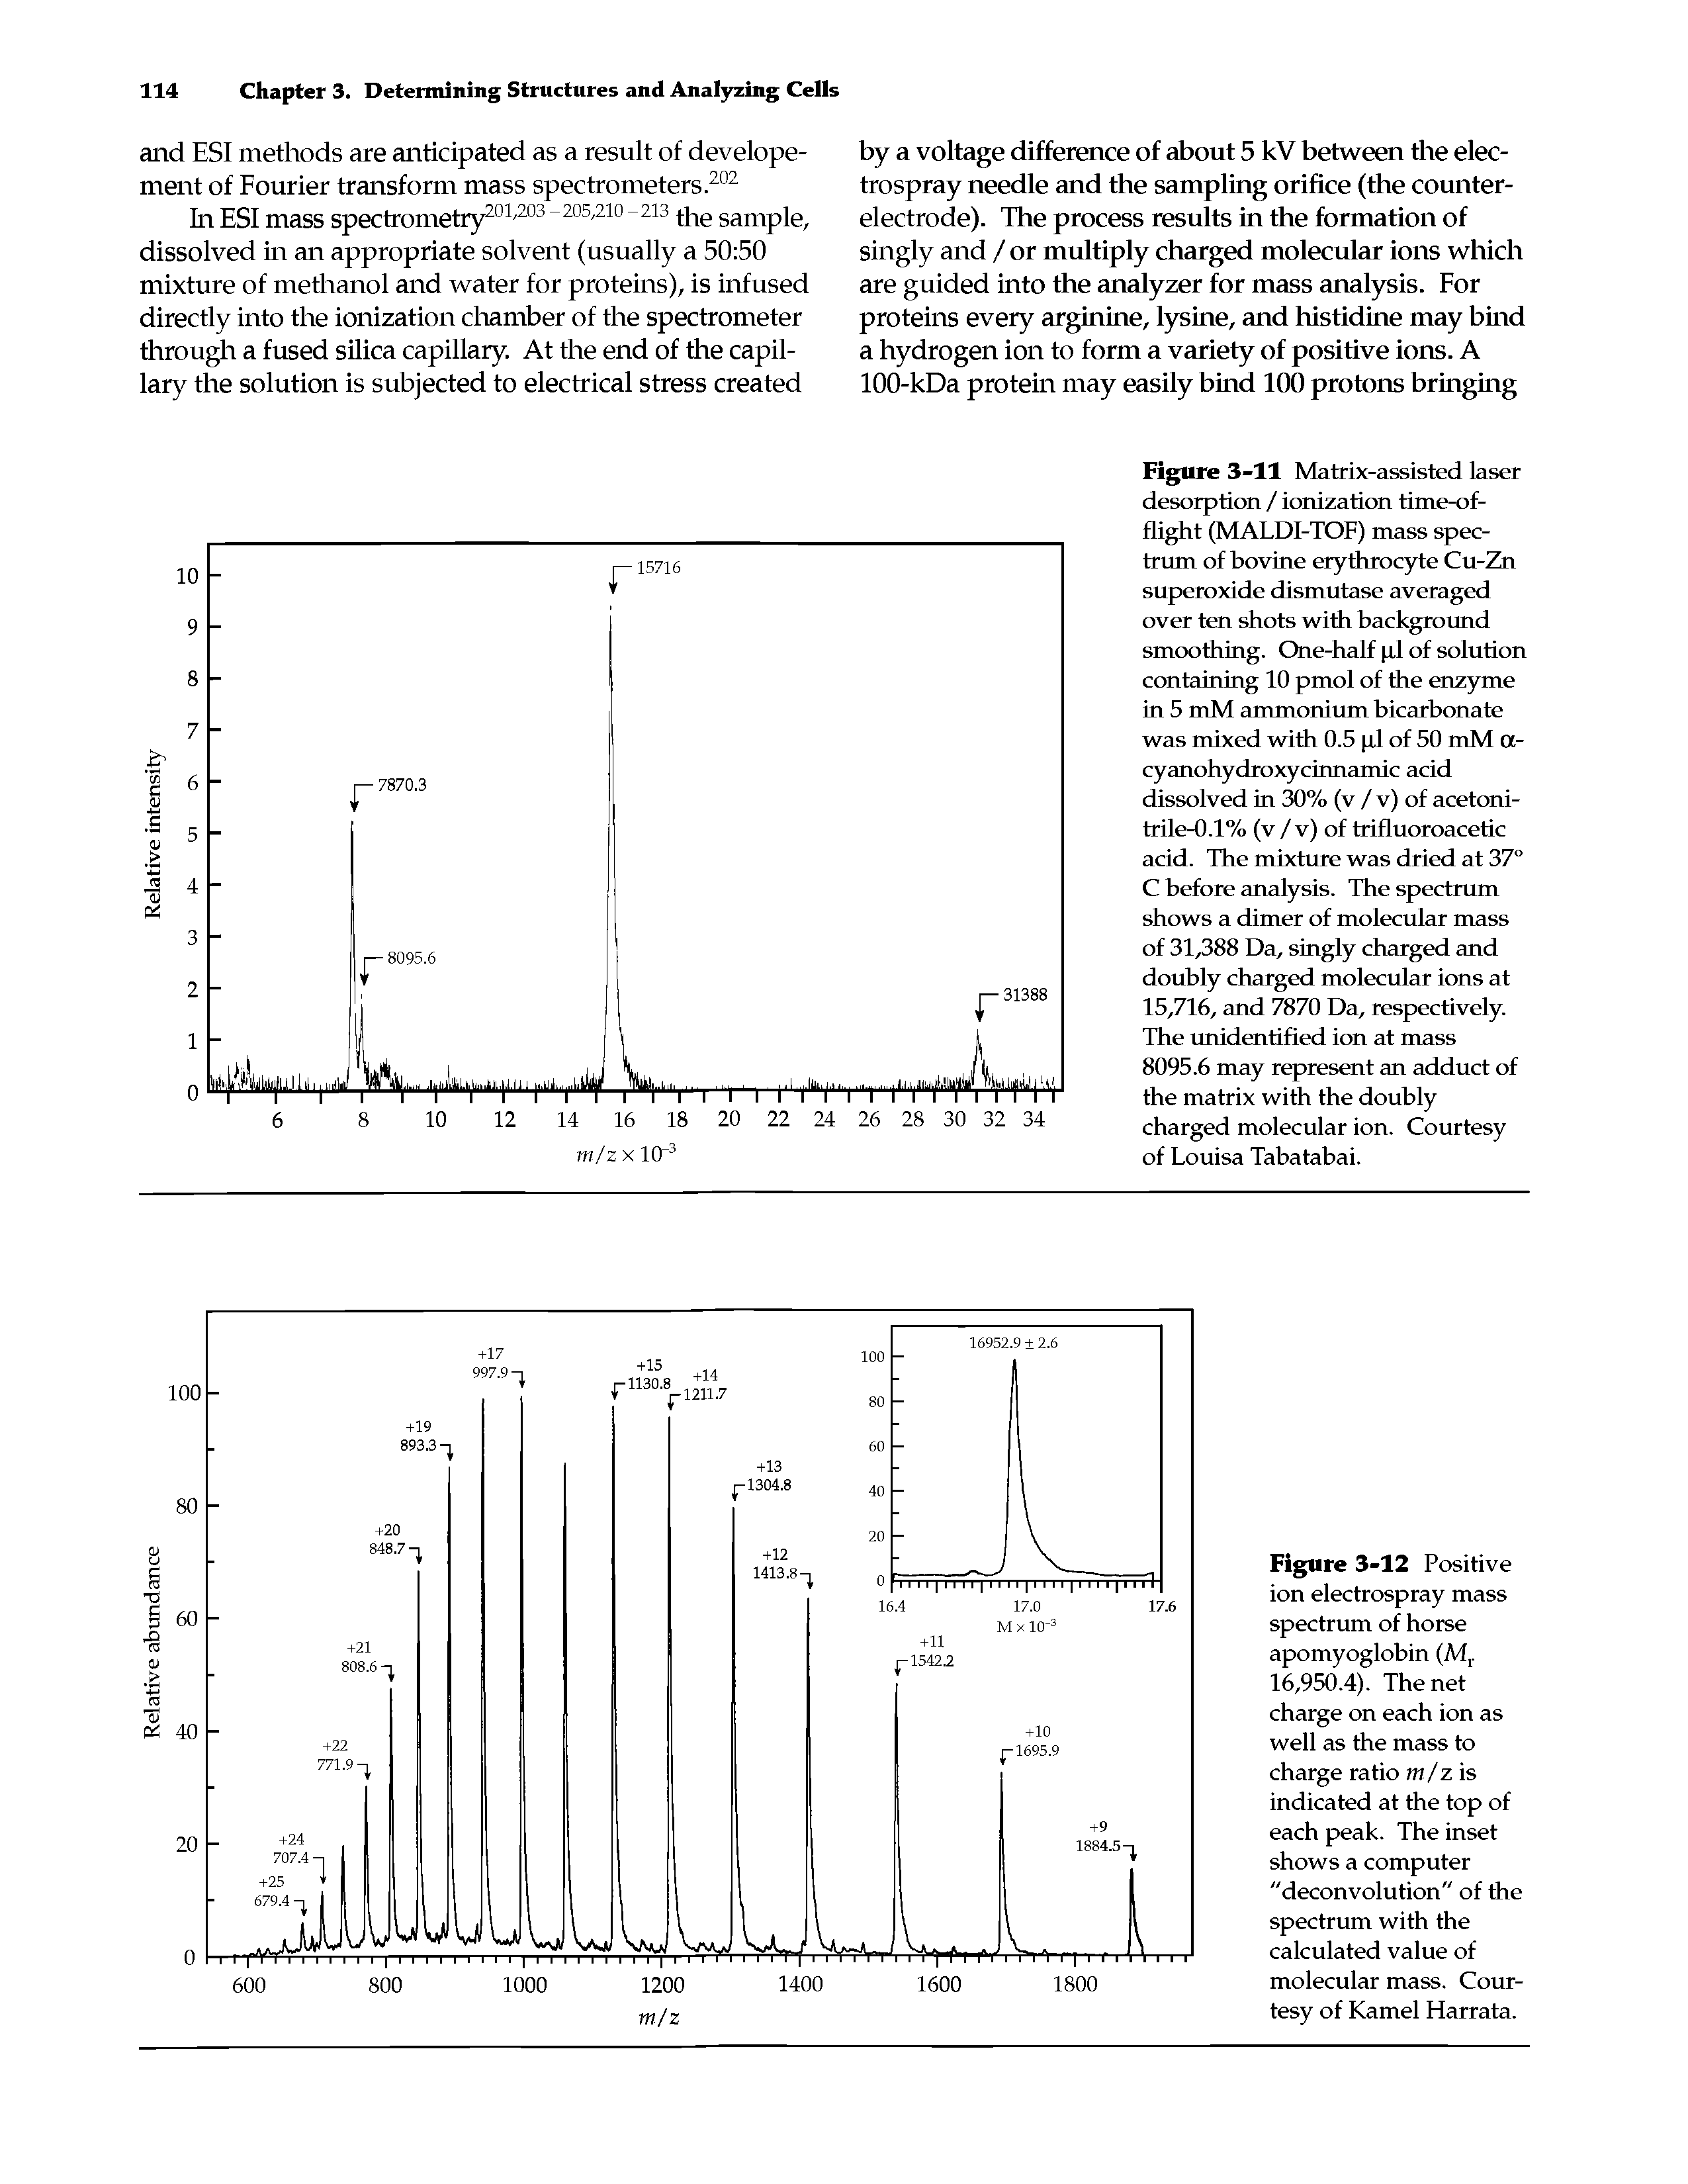 Figure 3-11 Matrix-assisted laser desorption / ionization time-of-flight (MALDI-TOF) mass spectrum of bovine erythrocyte Cu-Zn superoxide dismutase averaged over ten shots with background smoothing. One-half pi of solution containing 10 pmol of the enzyme in 5 mM ammonium bicarbonate was mixed with 0.5 pi of 50 mM a-cyanohydroxycinnamic acid dissolved in 30% (v / v) of acetoni-trile-0.1% (v / v) of trifluoroacetic acid. The mixture was dried at 37° C before analysis. The spectrum shows a dimer of molecular mass of 31,388 Da, singly charged and doubly charged molecular ions at 15,716, and 7870 Da, respectively. The unidentified ion at mass 8095.6 may represent an adduct of the matrix with the doubly charged molecular ion. Courtesy of Louisa Tabatabai.